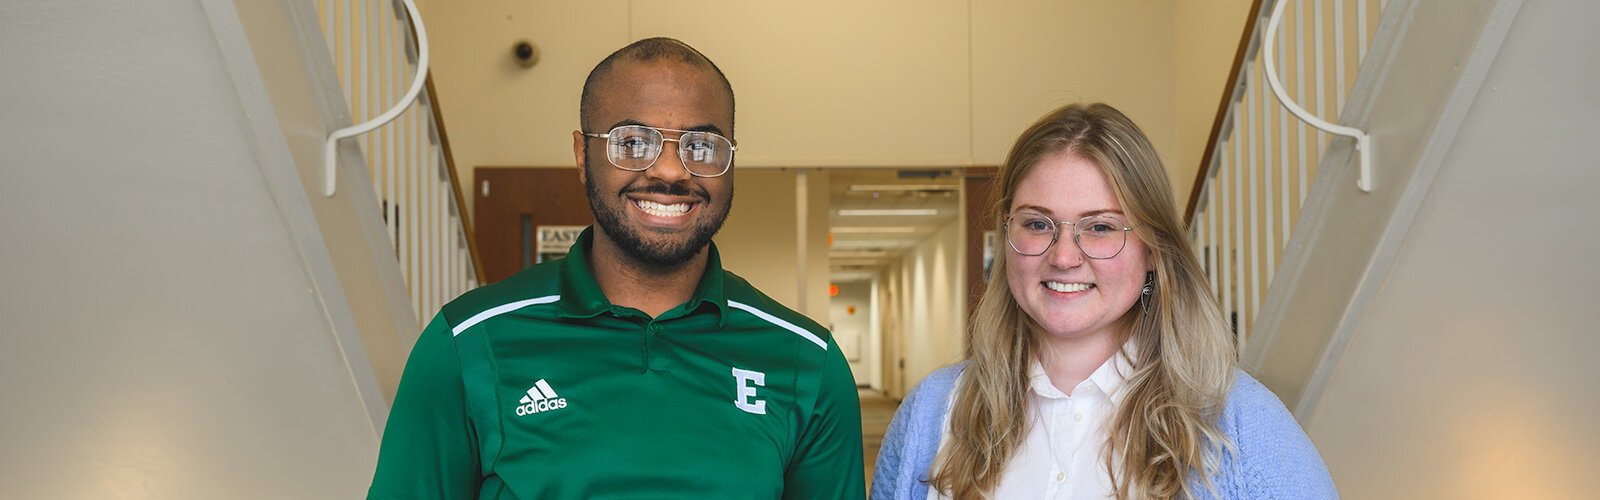 Engage @ EMU Voter Coalition members Lamarr Mitchell and Maggie Whittemore.